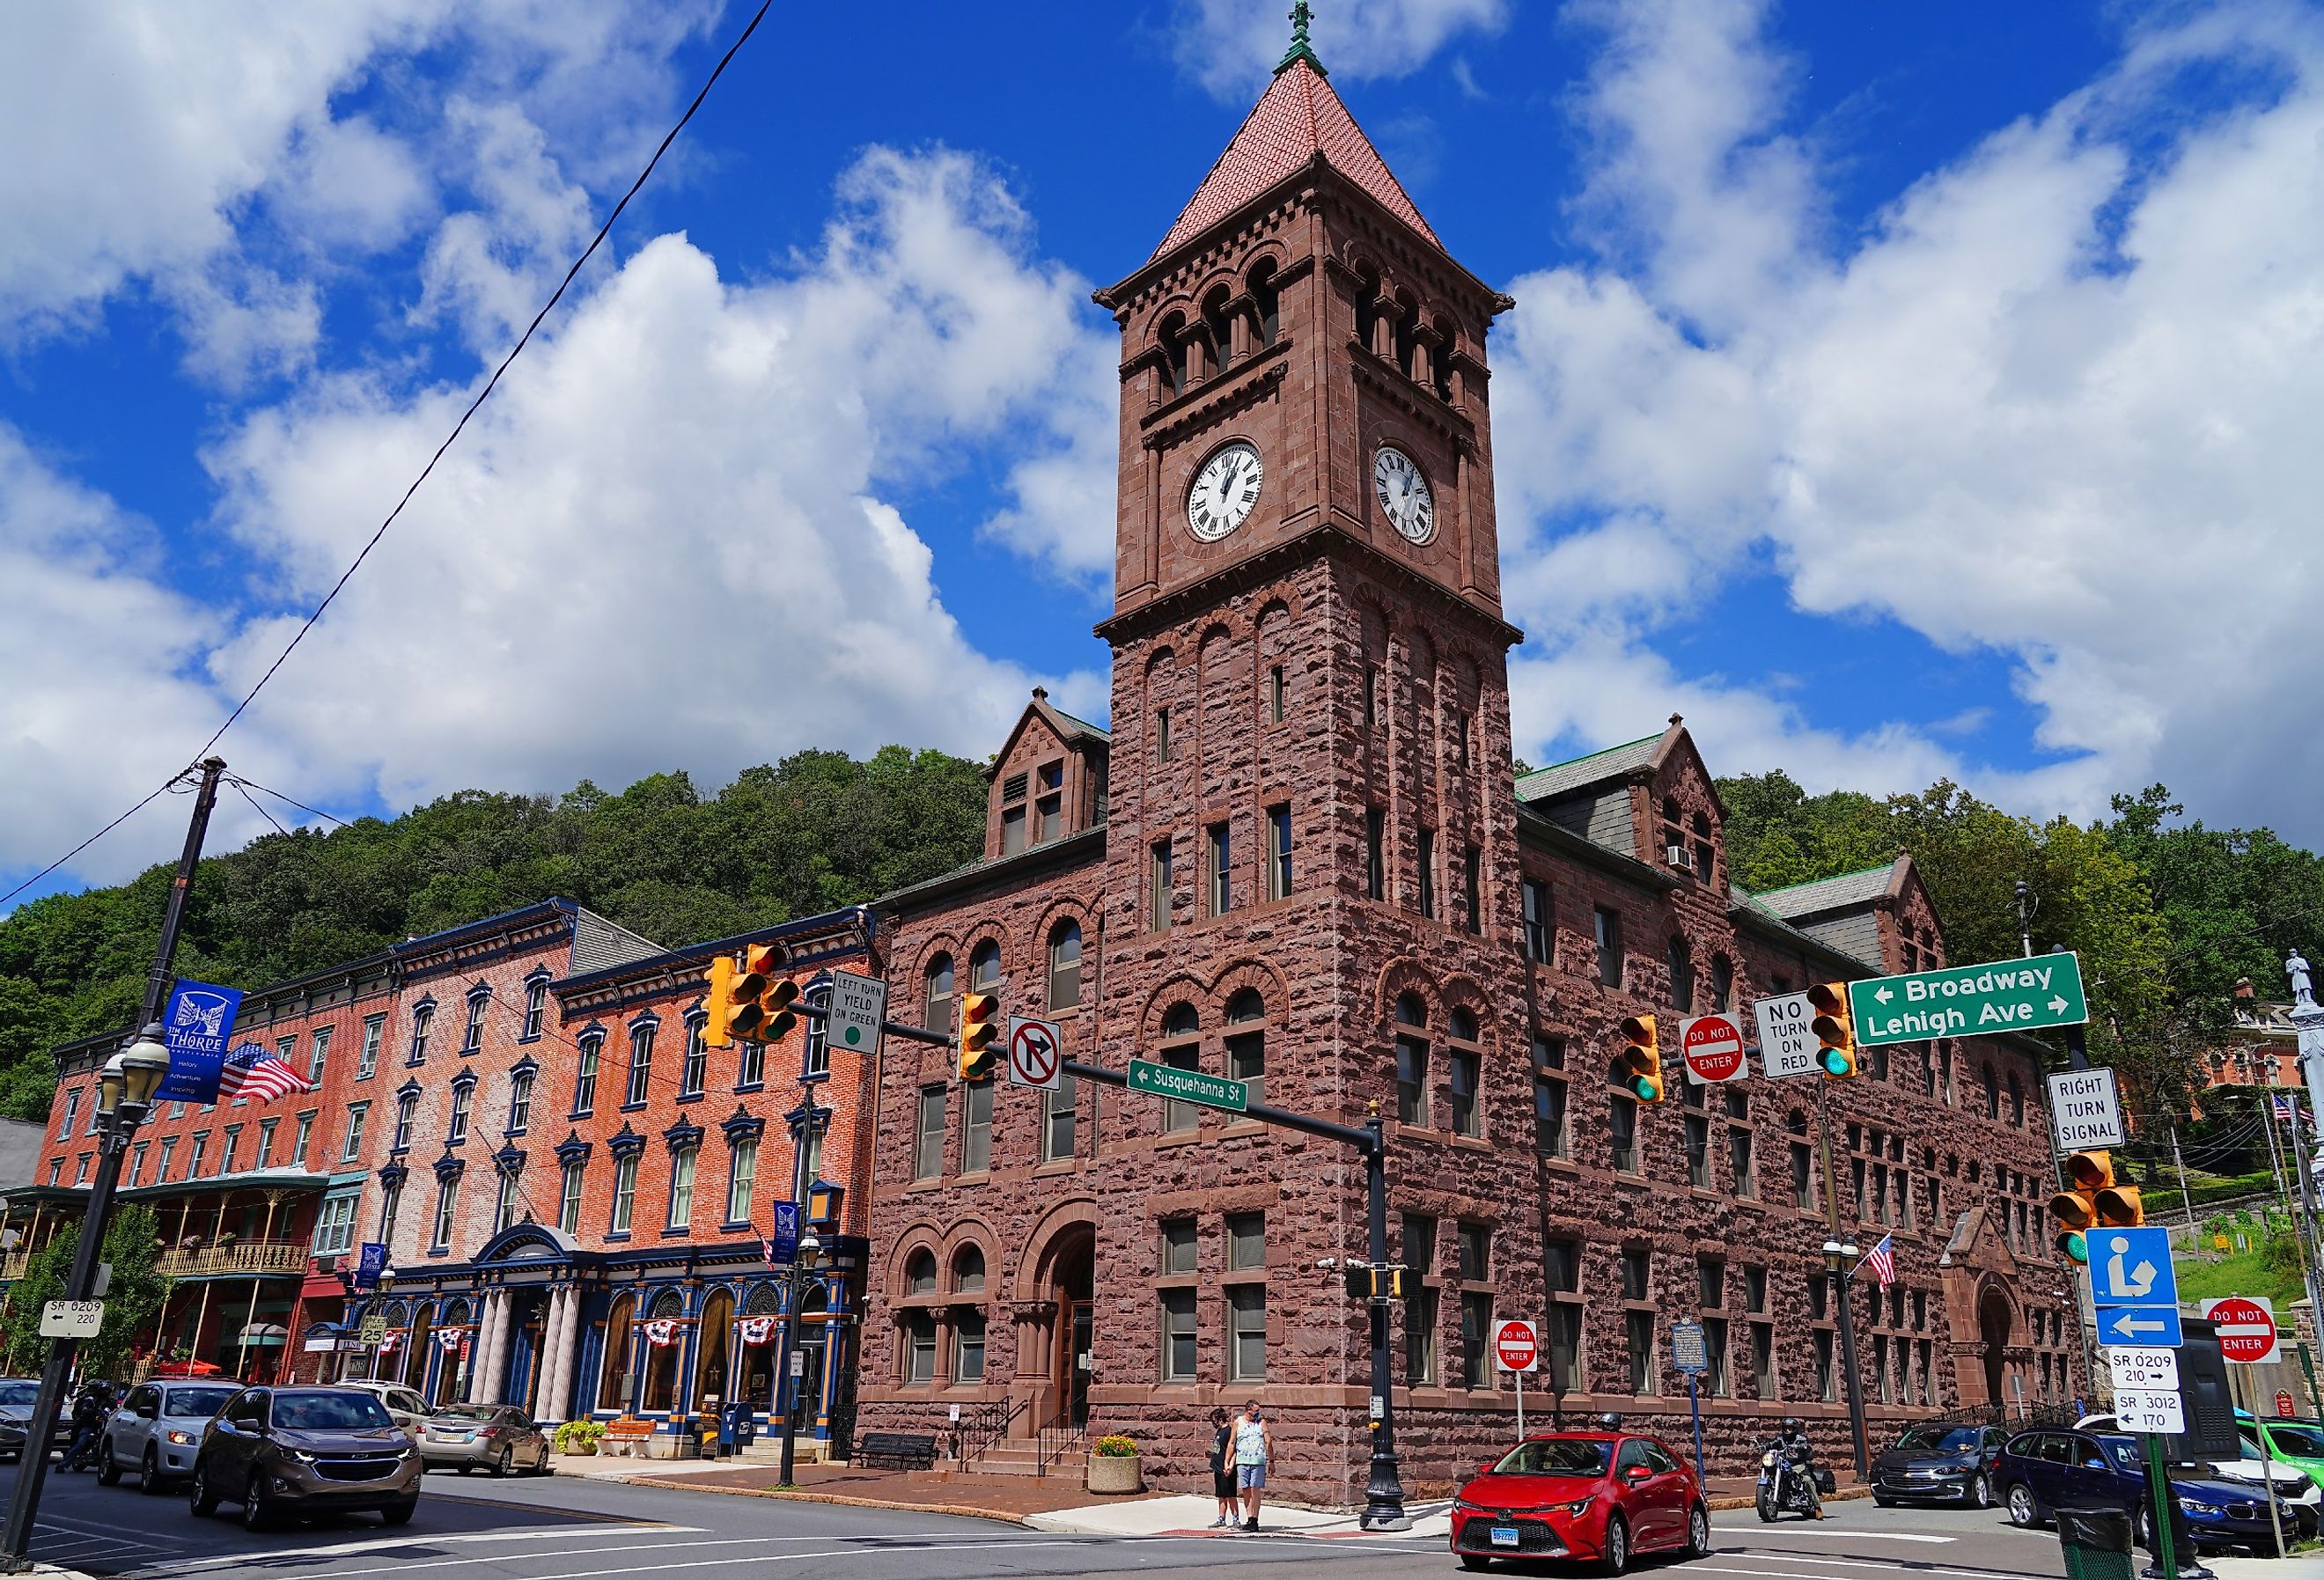 View of the historic town of Jim Thorpe in the Lehigh Valley in Carbon County, Pennsylvania, United States.